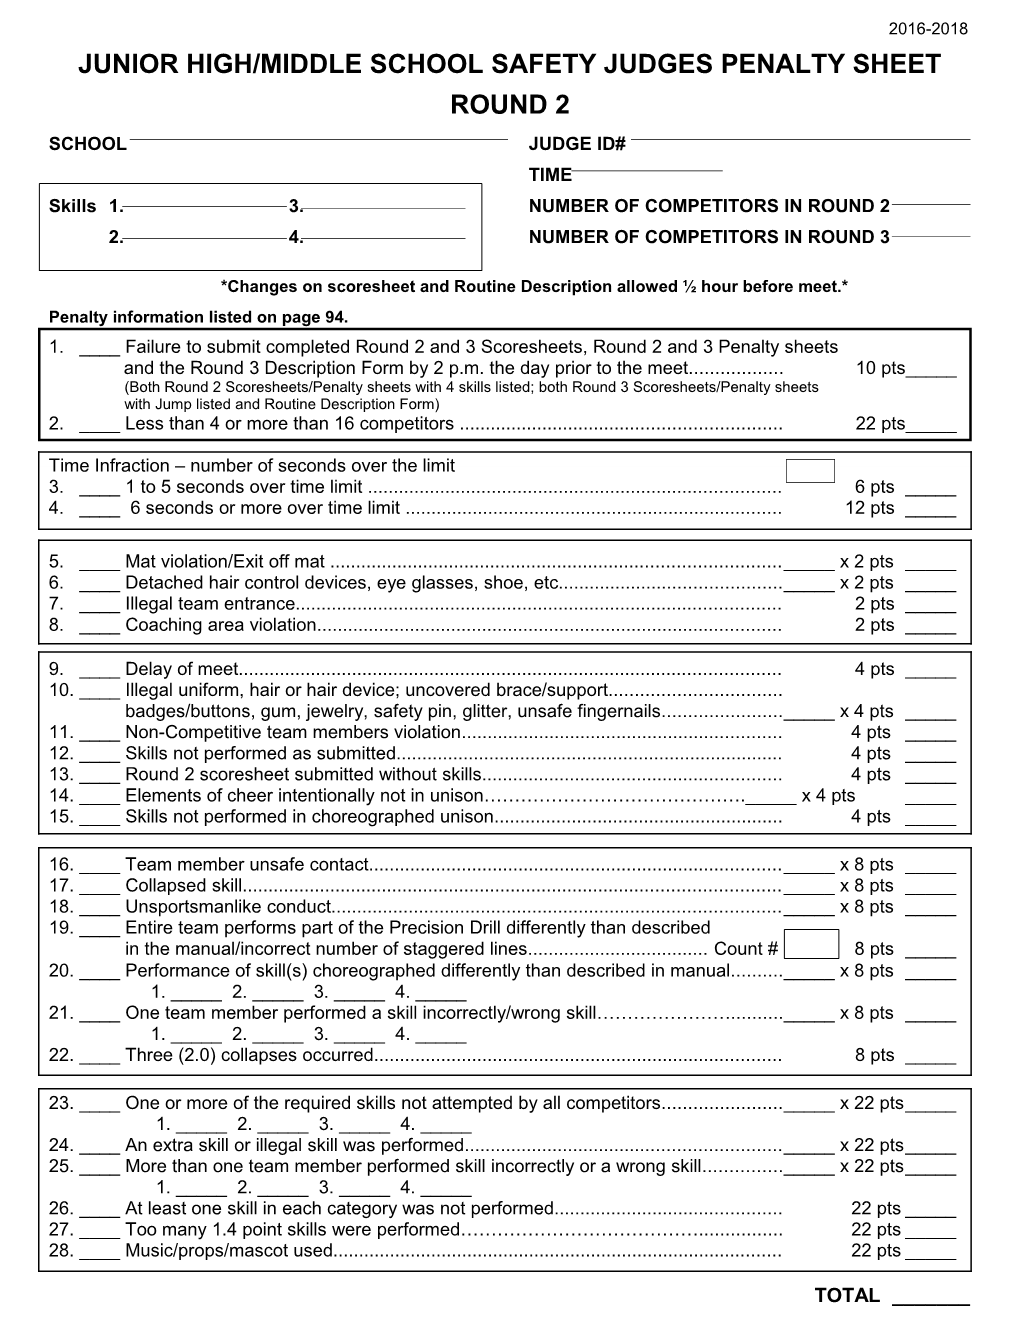 Junior High/Middle School Safety Judges Penalty Sheet